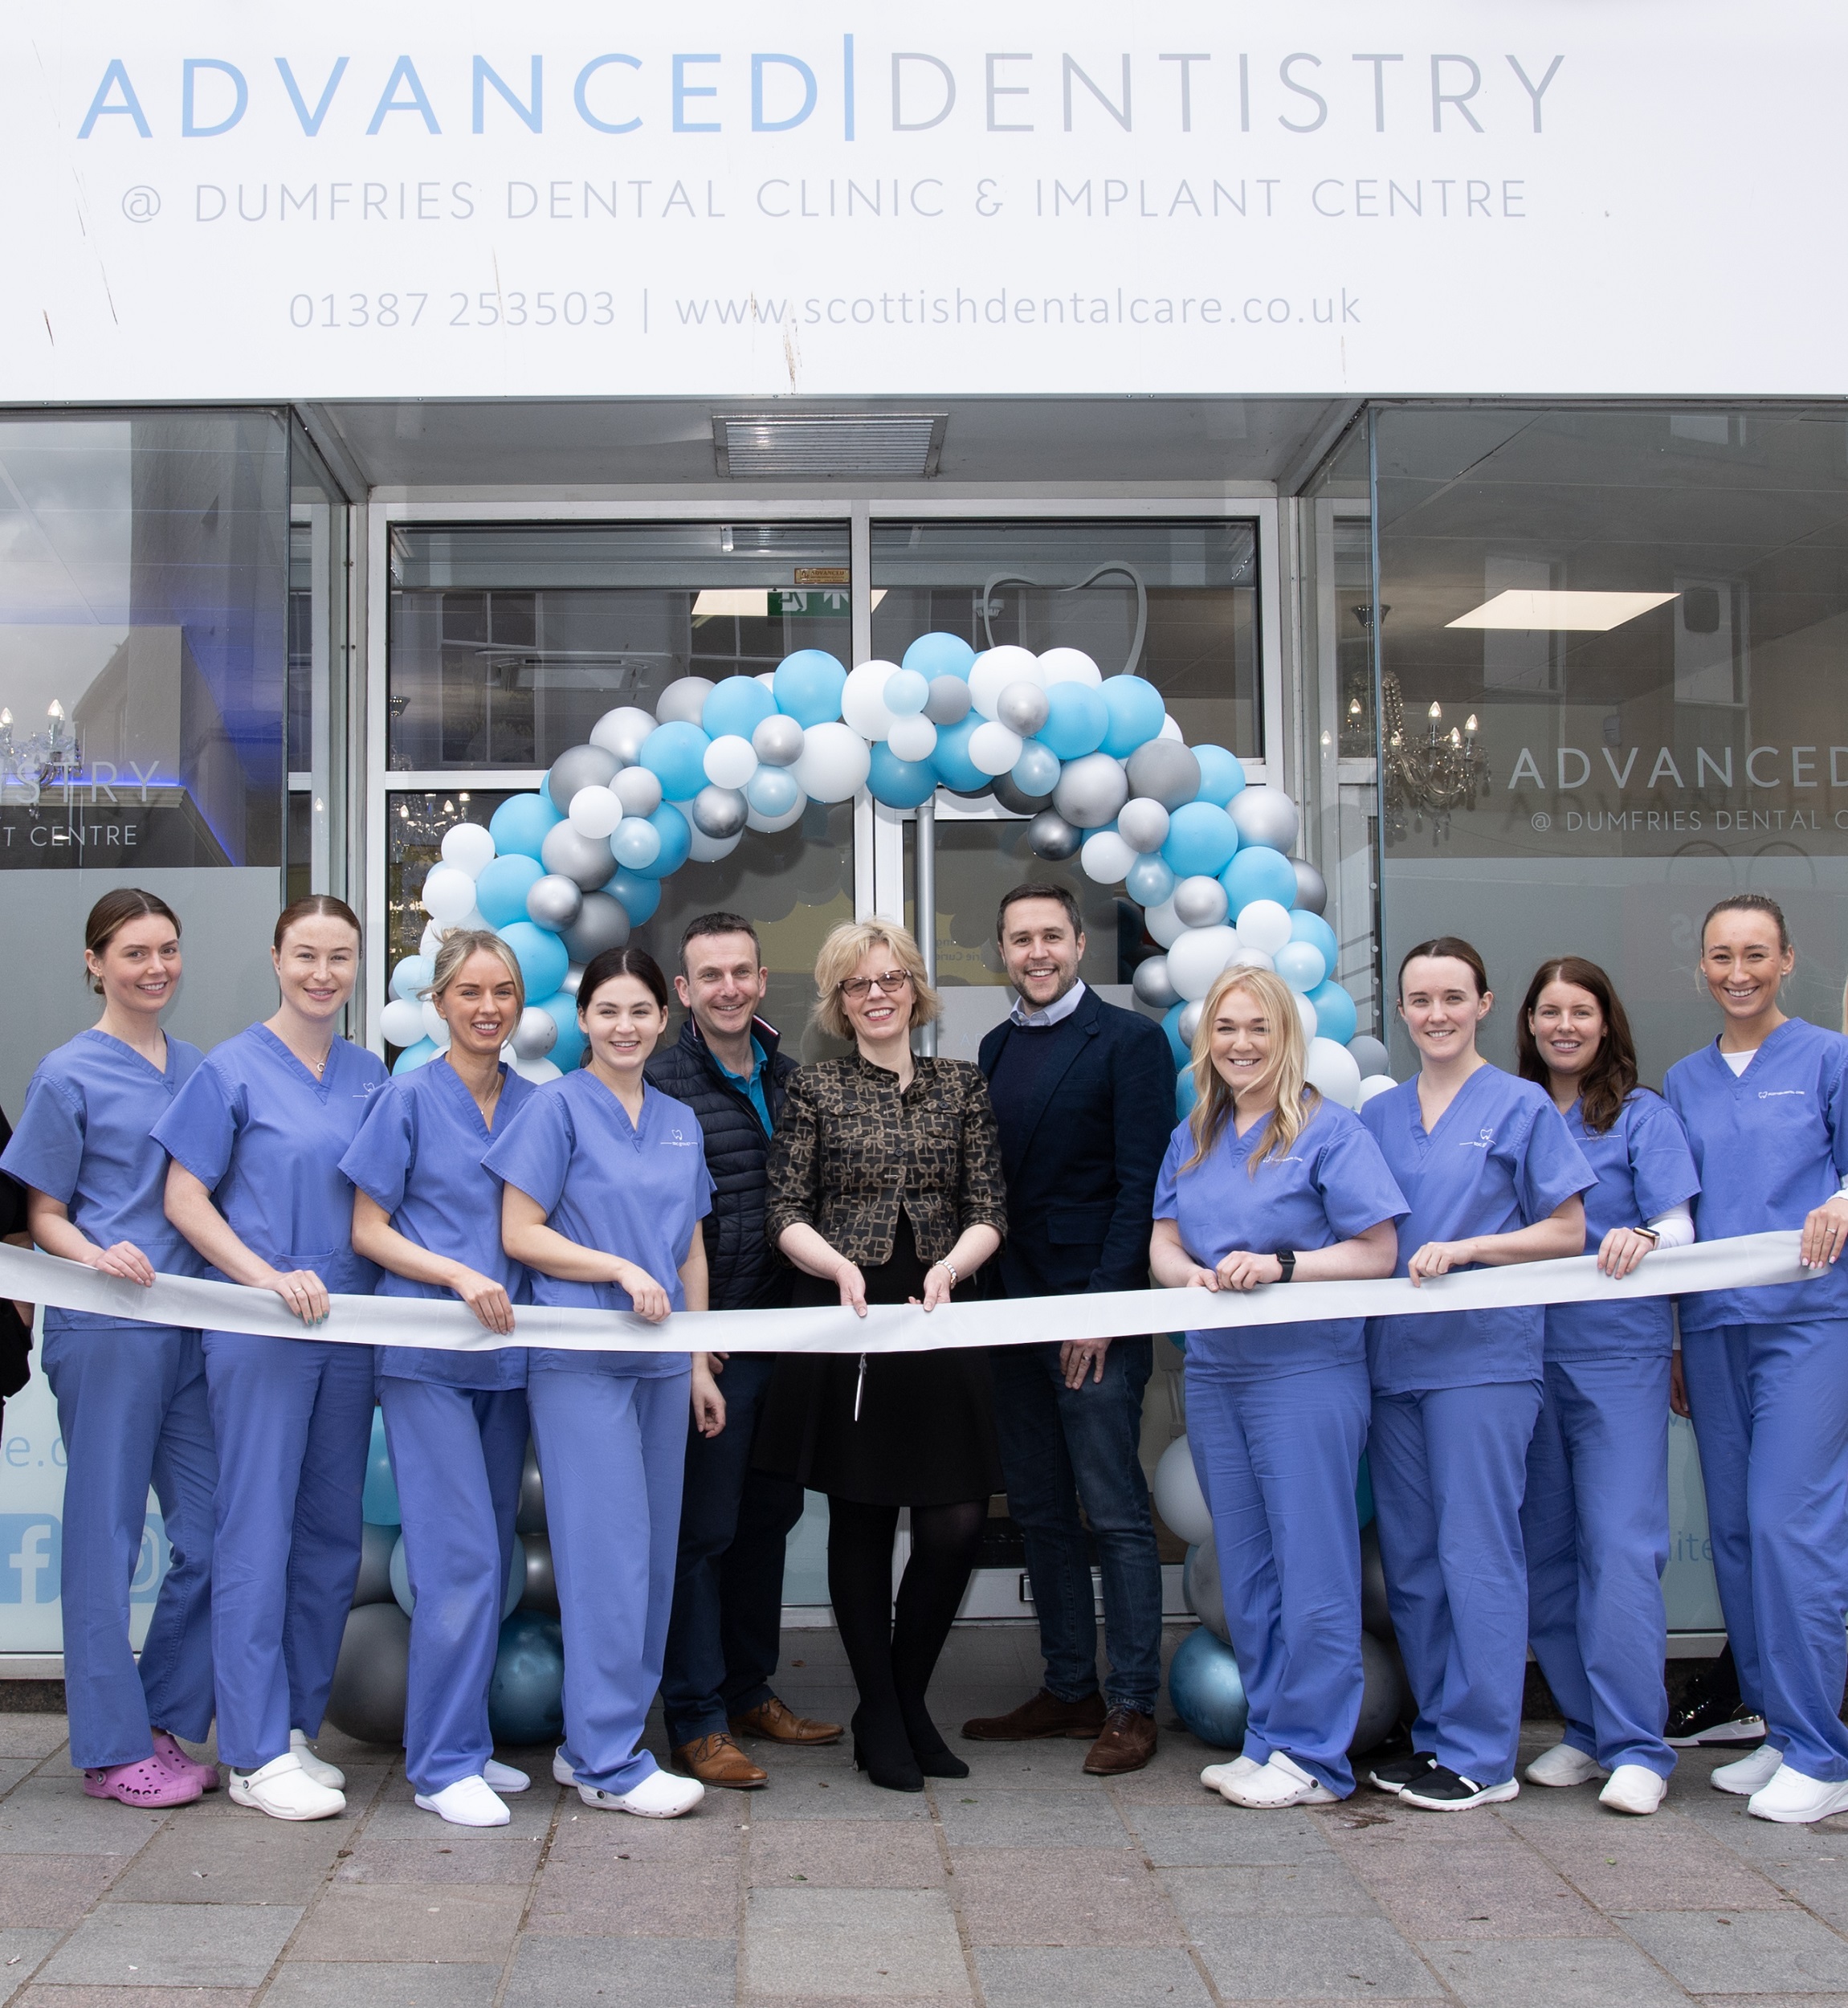 Dumfries and Galloway dental practice boosted by £600,000 funding